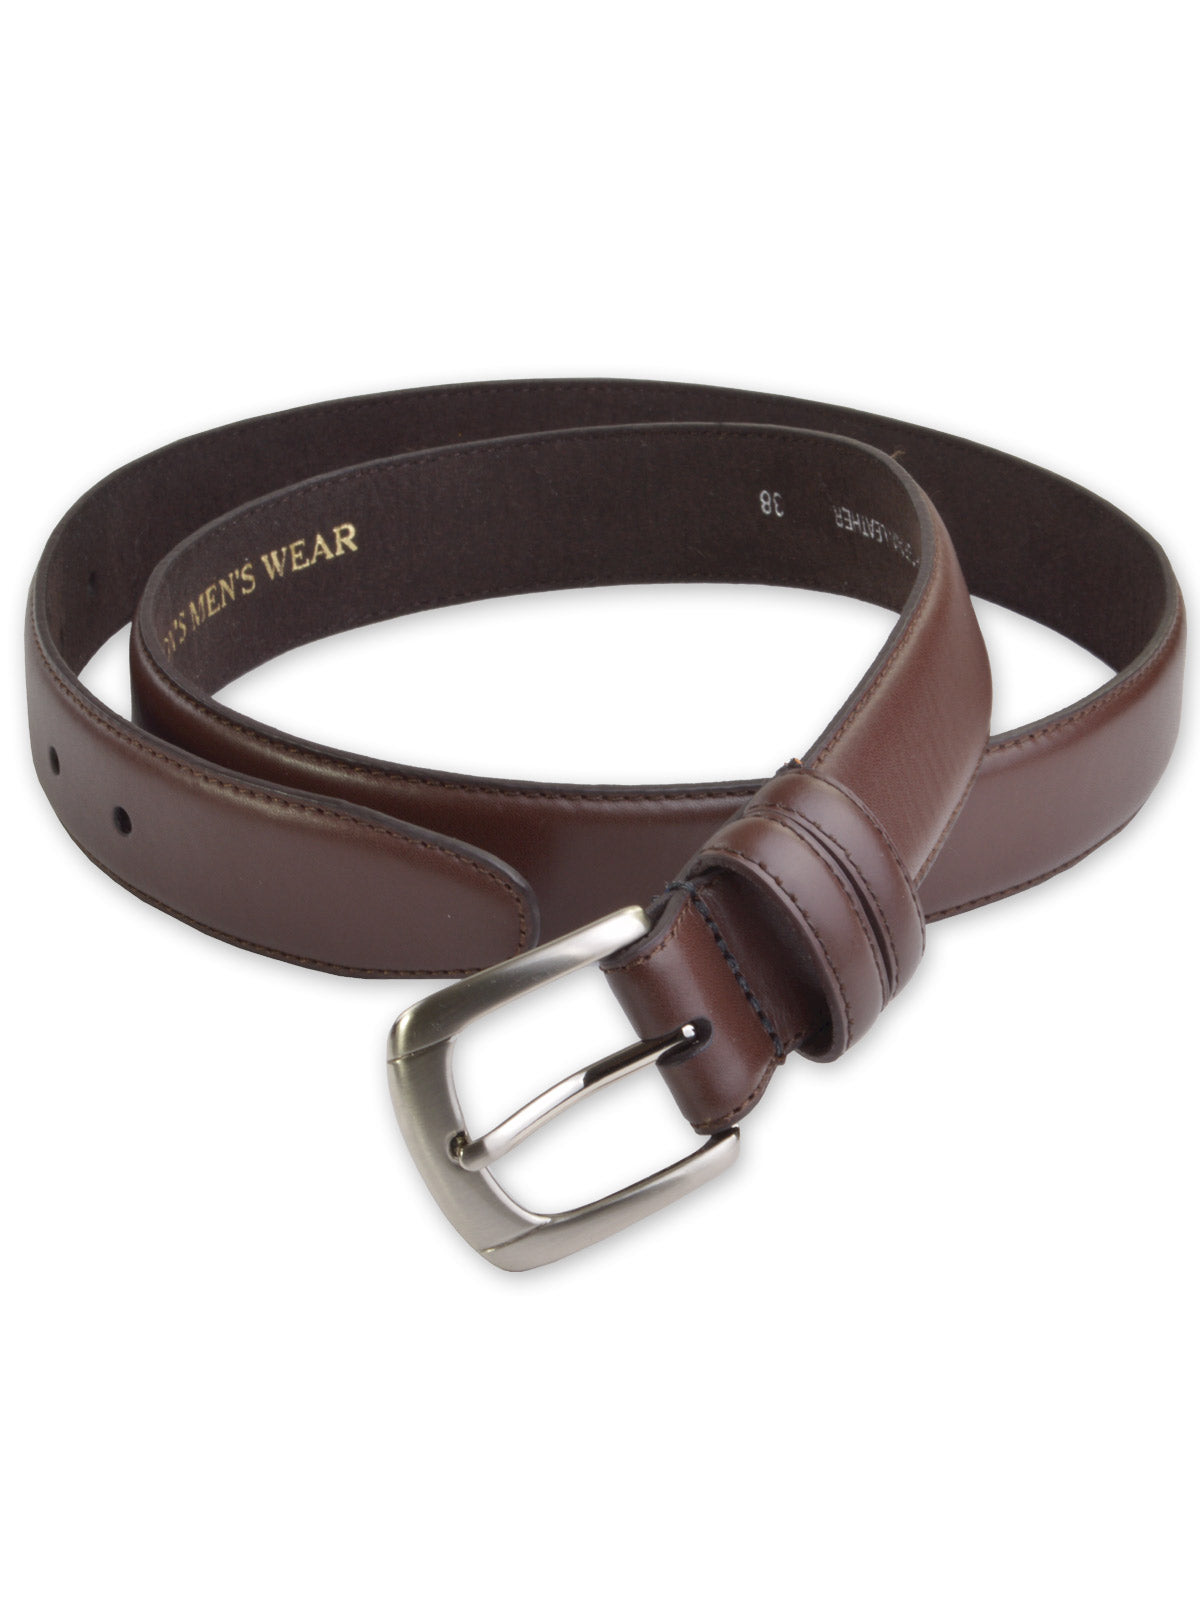 Marc Wolf Leather Dress Belts - Brown with Silver Buckle 400SLV-C-BRN (56-70)